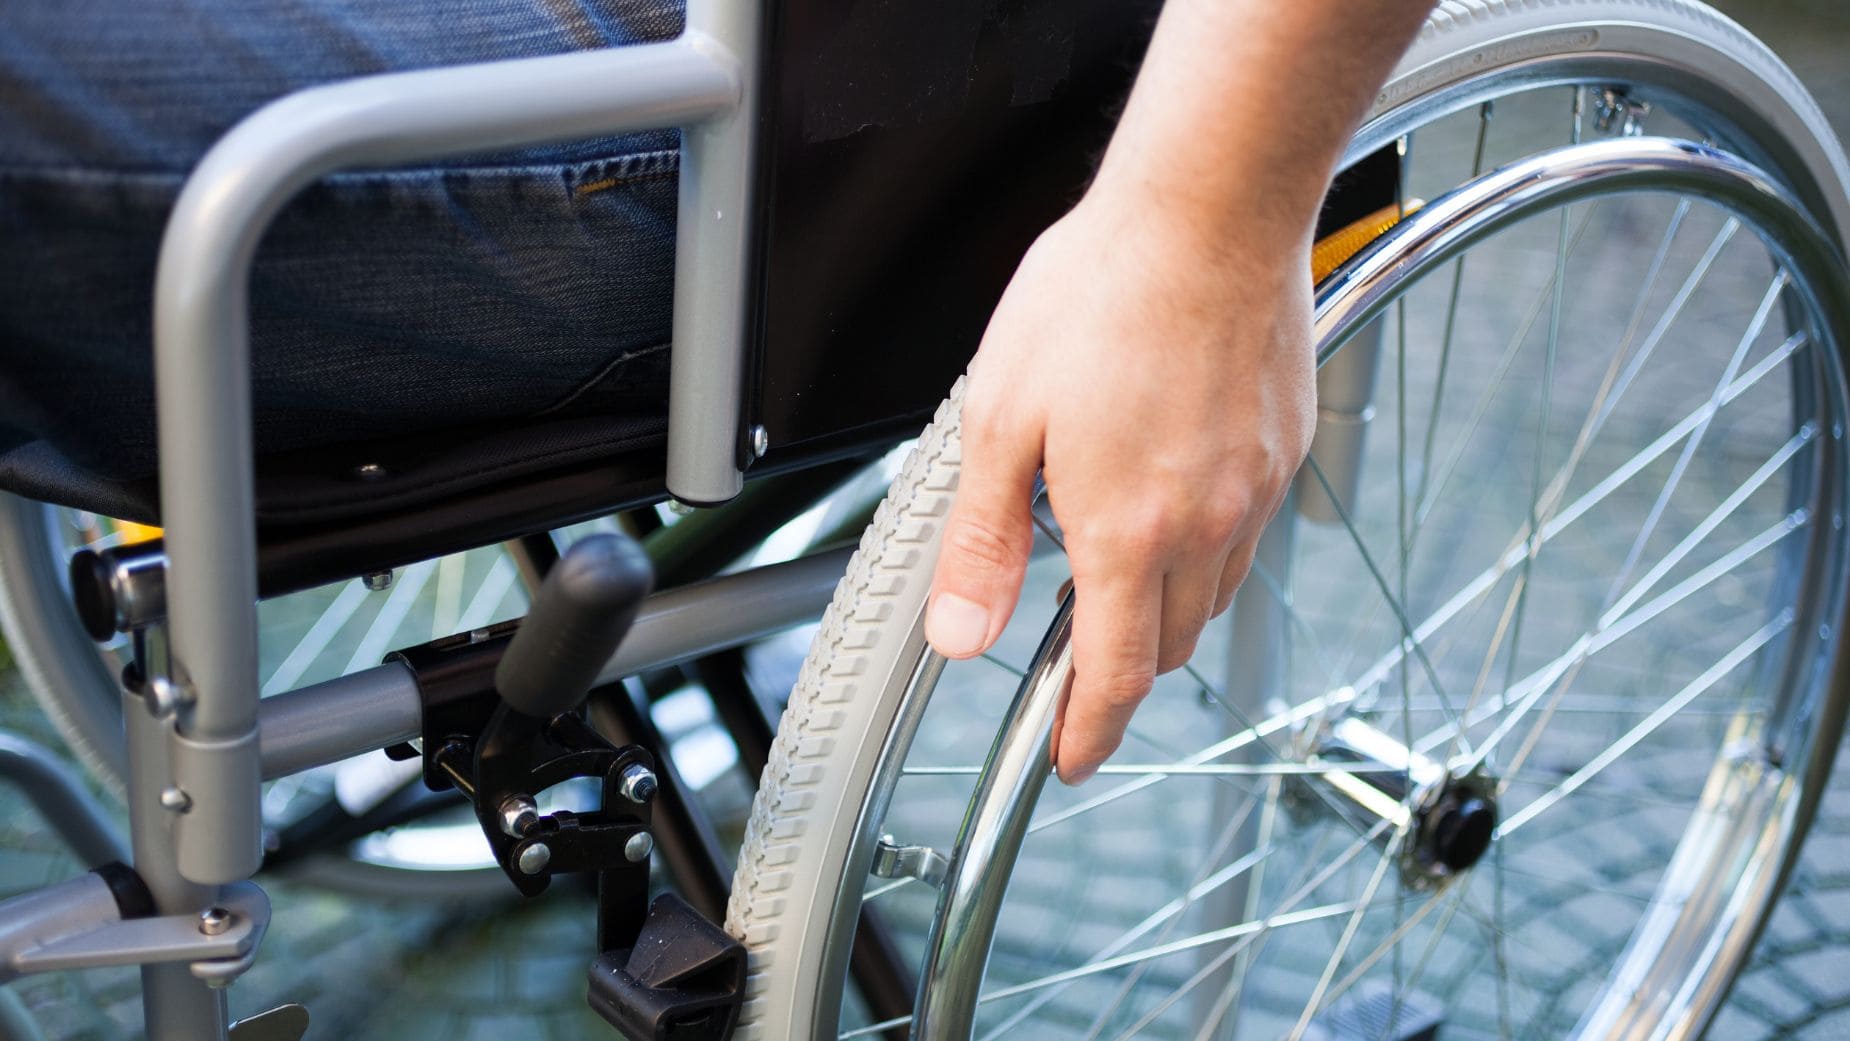 Find out the requirements to get the next Disability Benefit